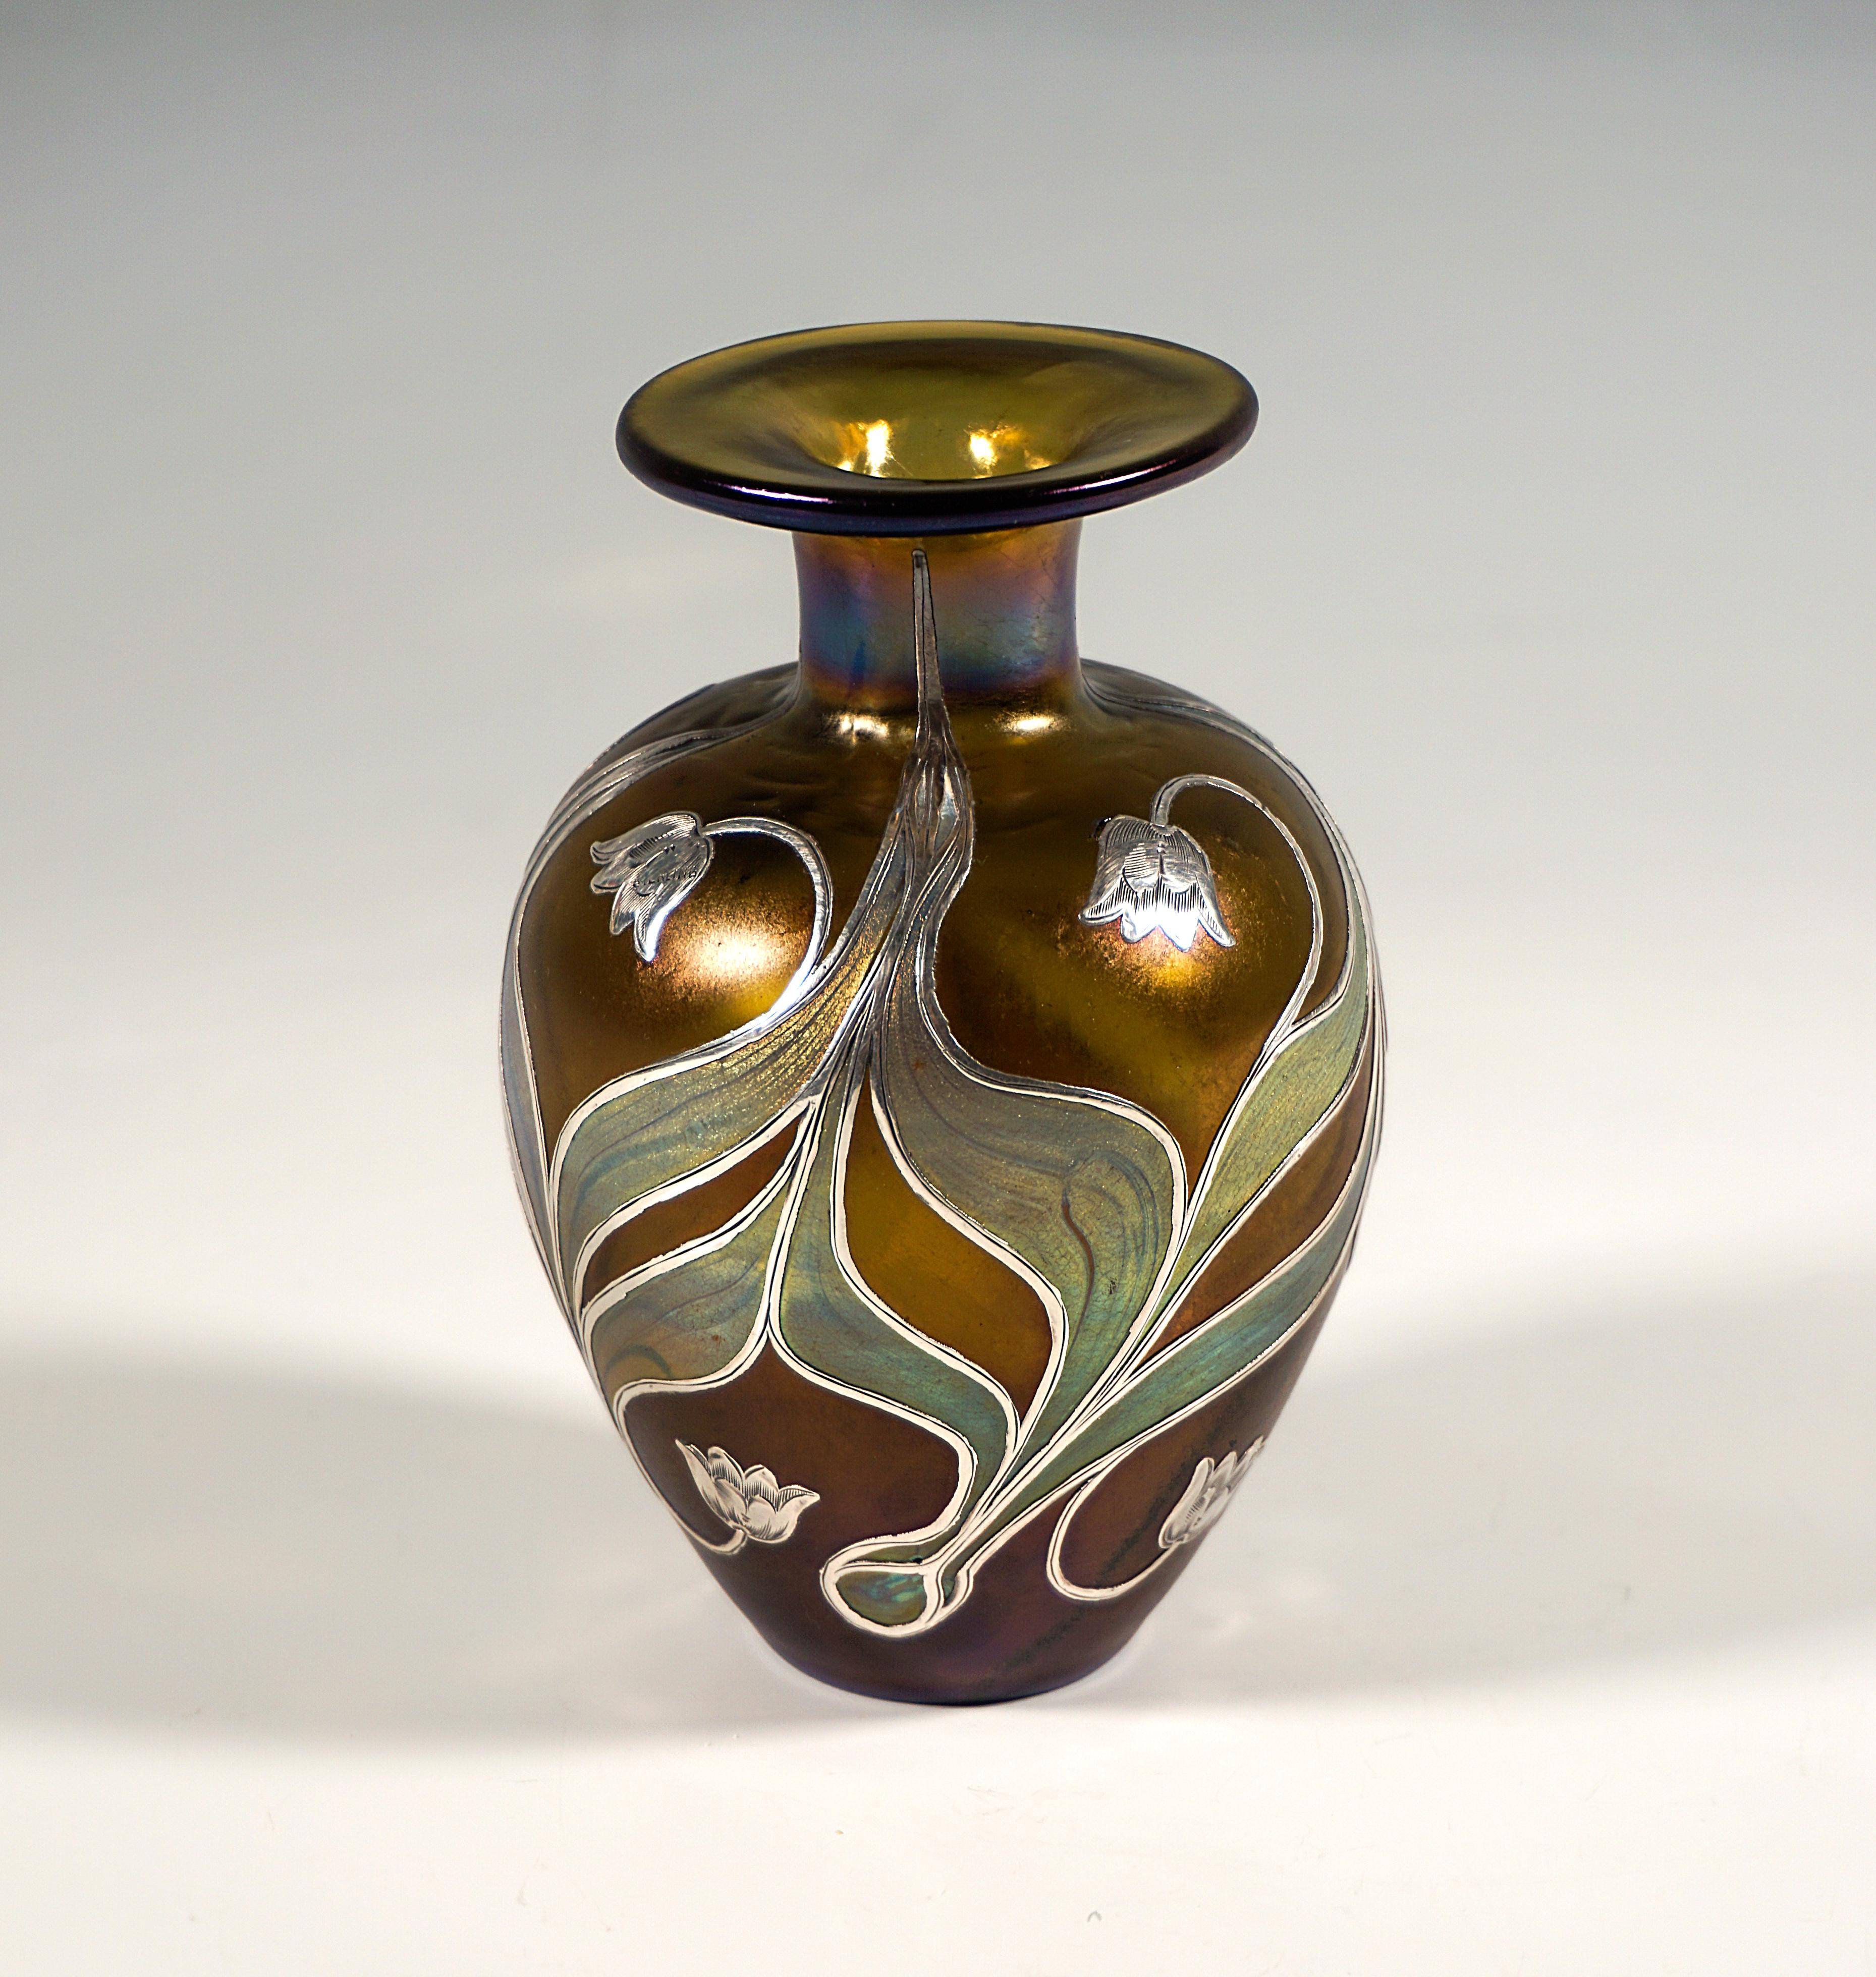 Hand-Crafted Loetz Art Nouveau Vase Bronce Phenomenon Gre 7801 With Silver Overlay, Ca 1900